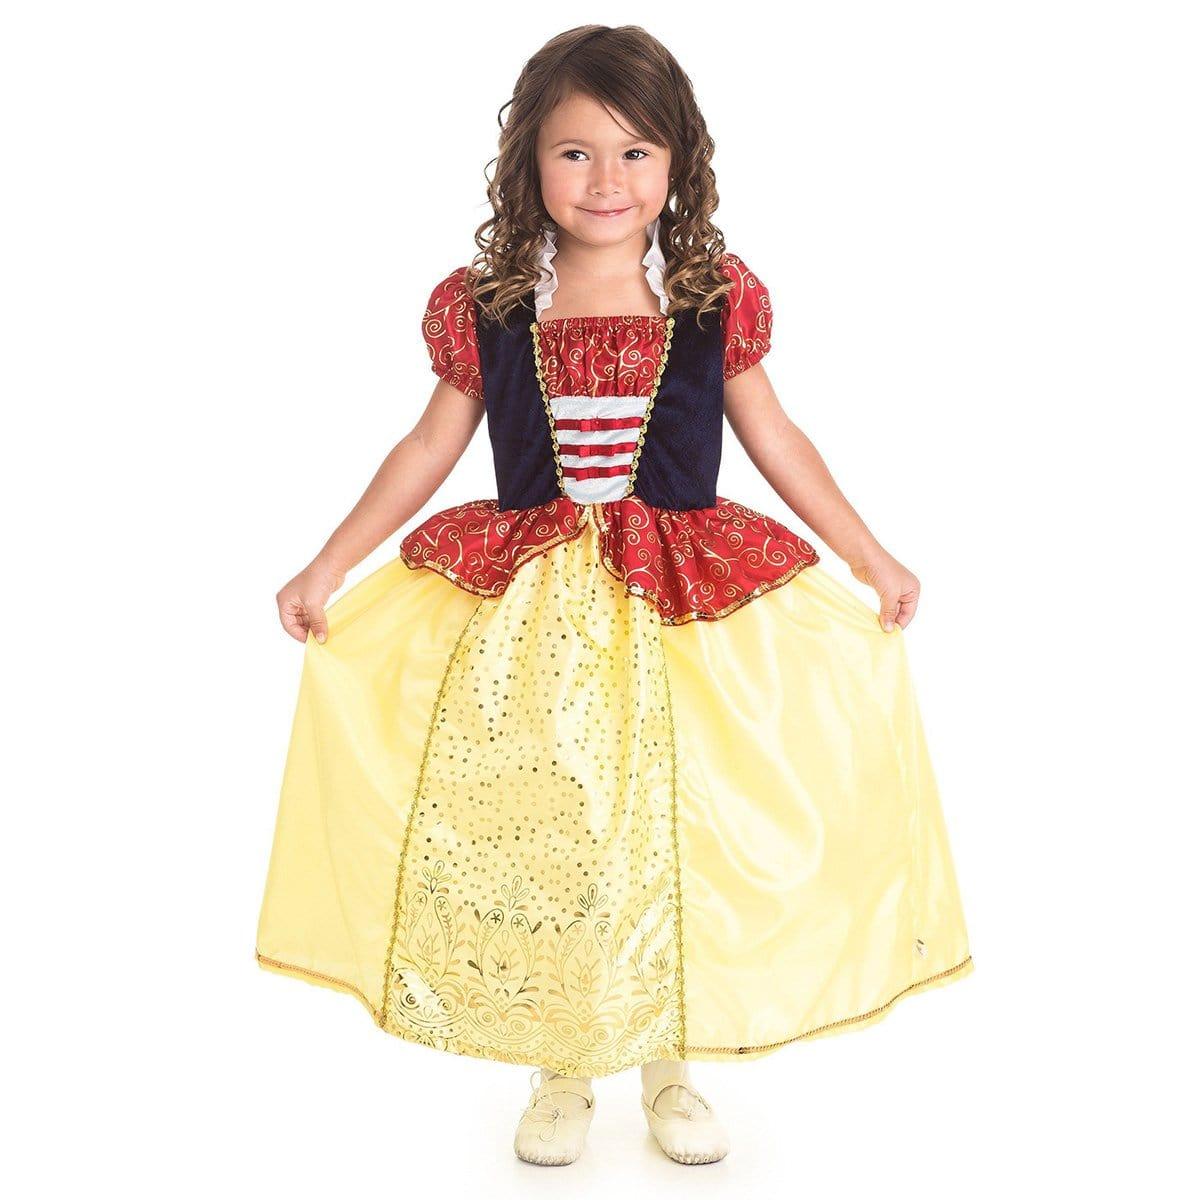 Buy Costumes Snow White costume for Kids, Snow White and the Seven Dwarfs sold at Party Expert